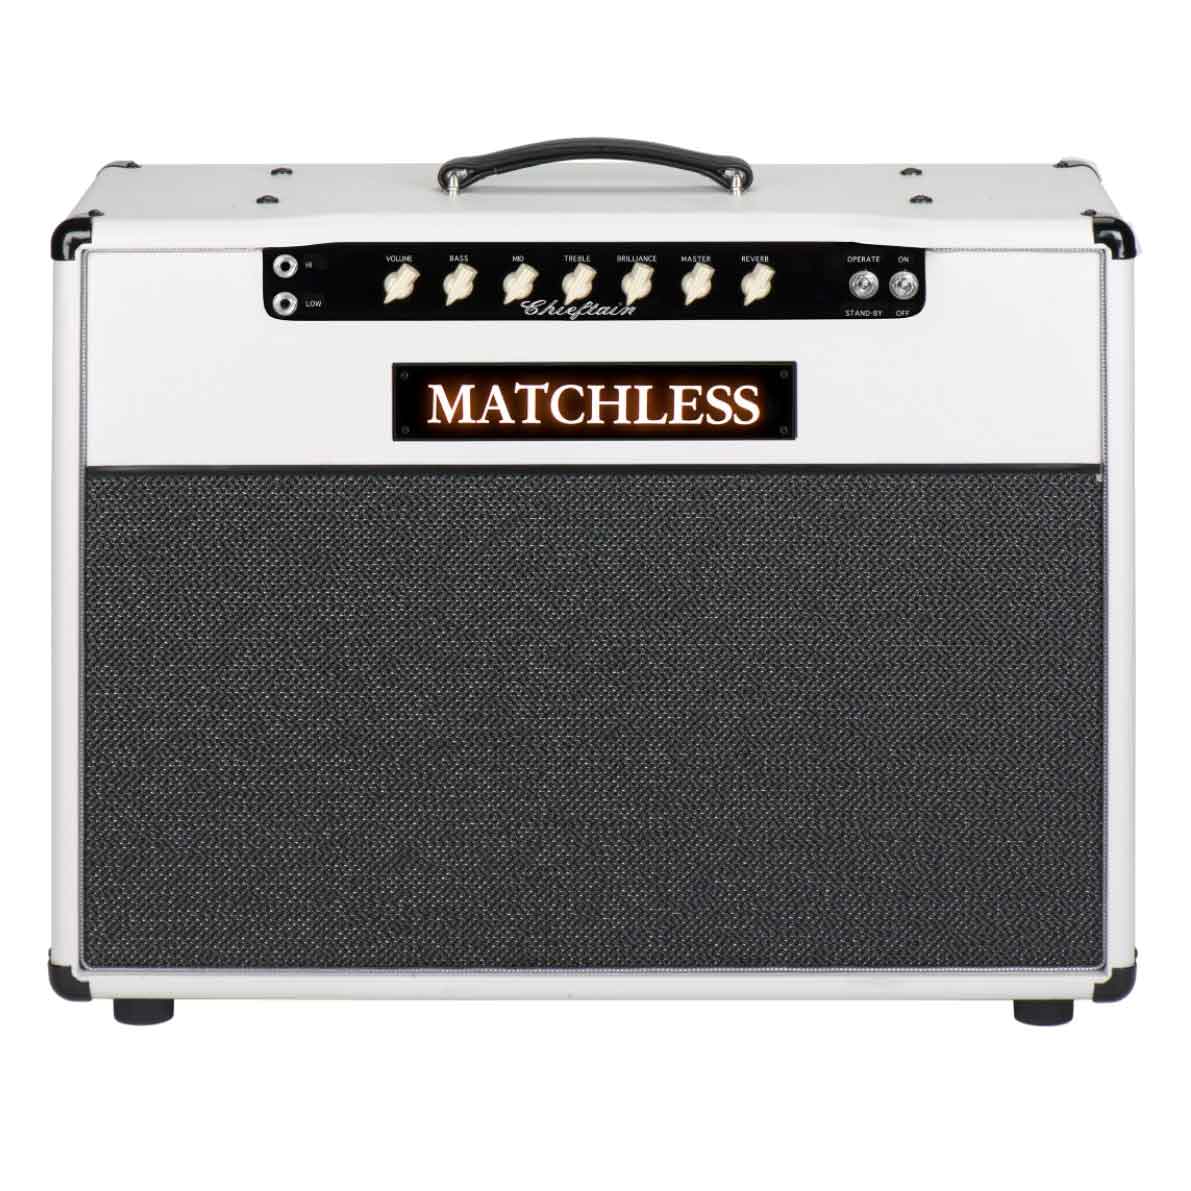 Matchless Chieftain 40w EL34 Combo with reverb - MusicStreet